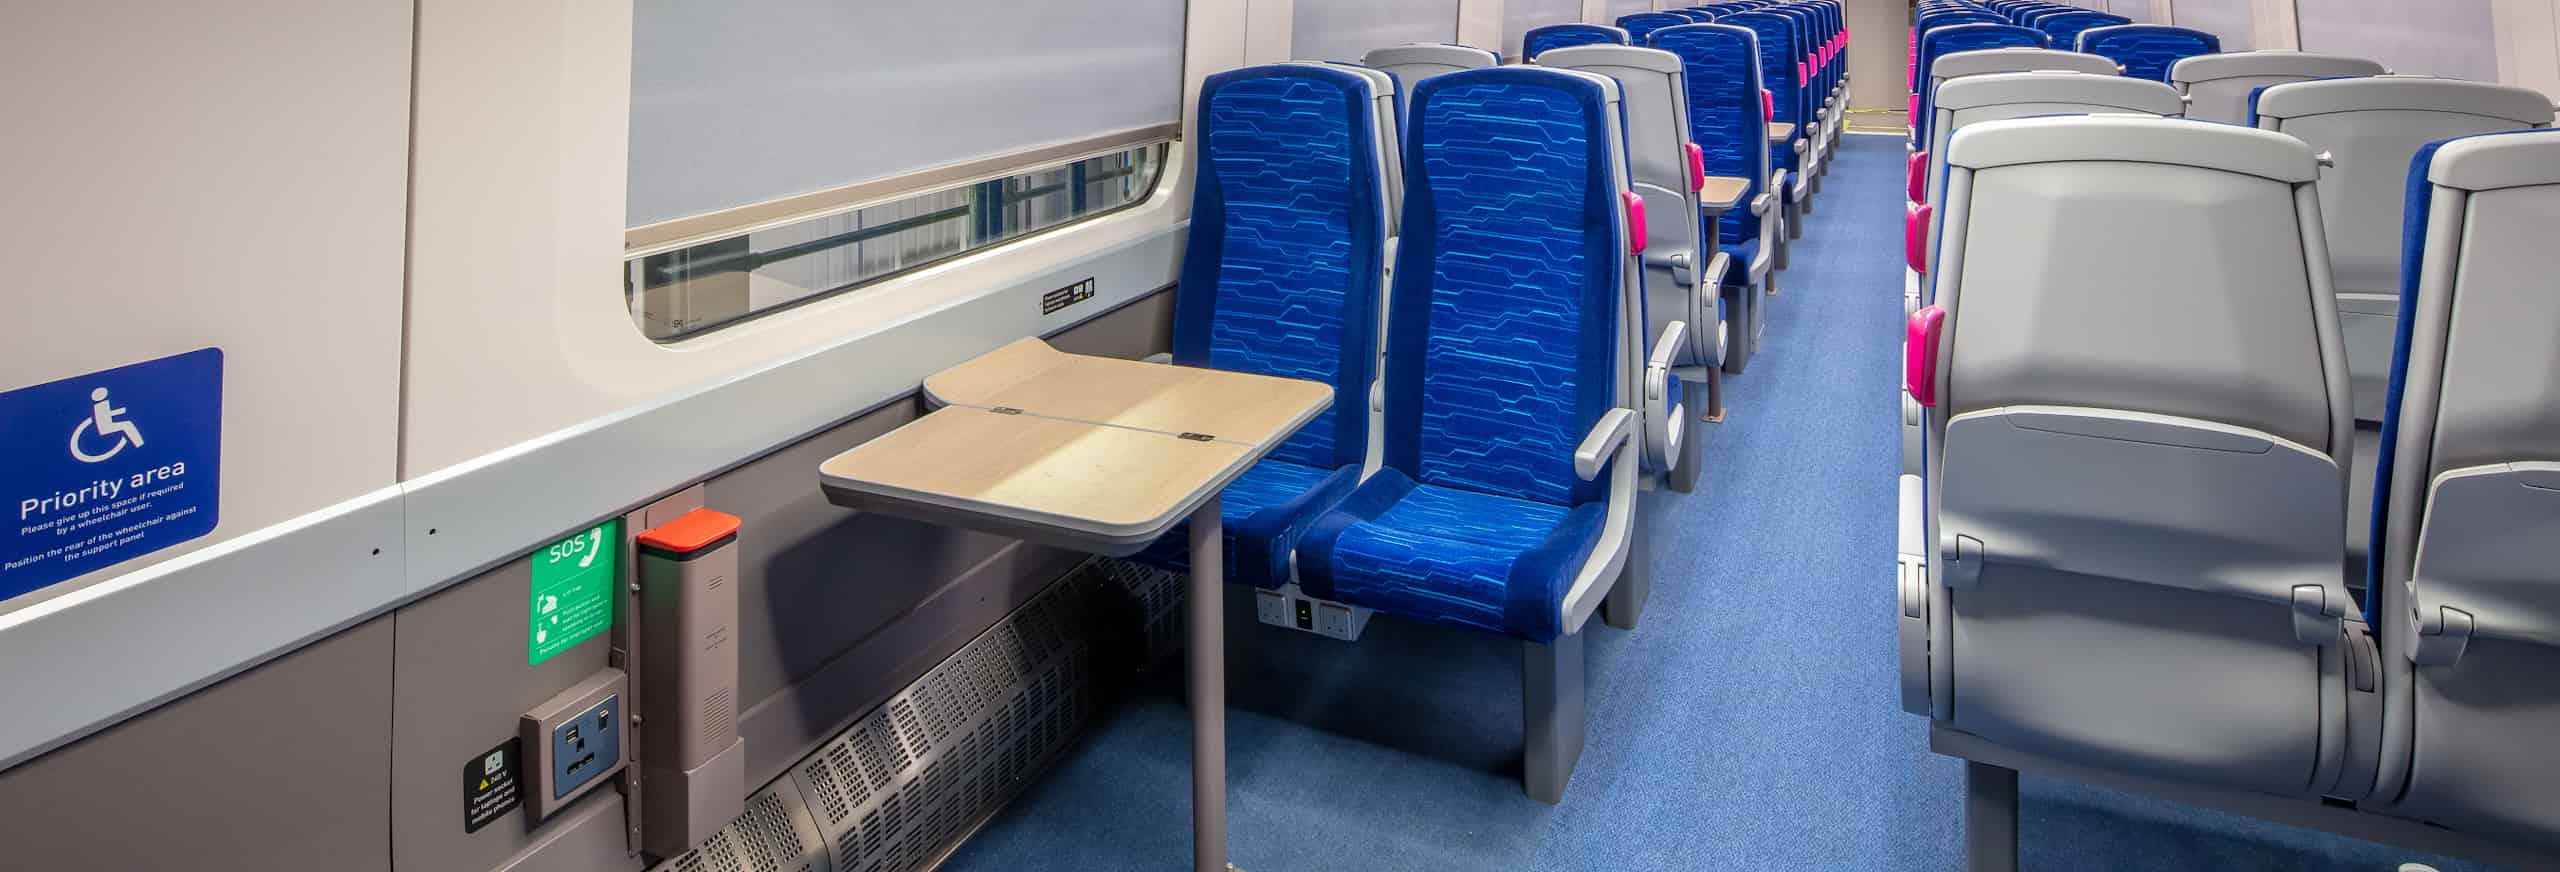 Hull Trains Paragon standard class accessible area